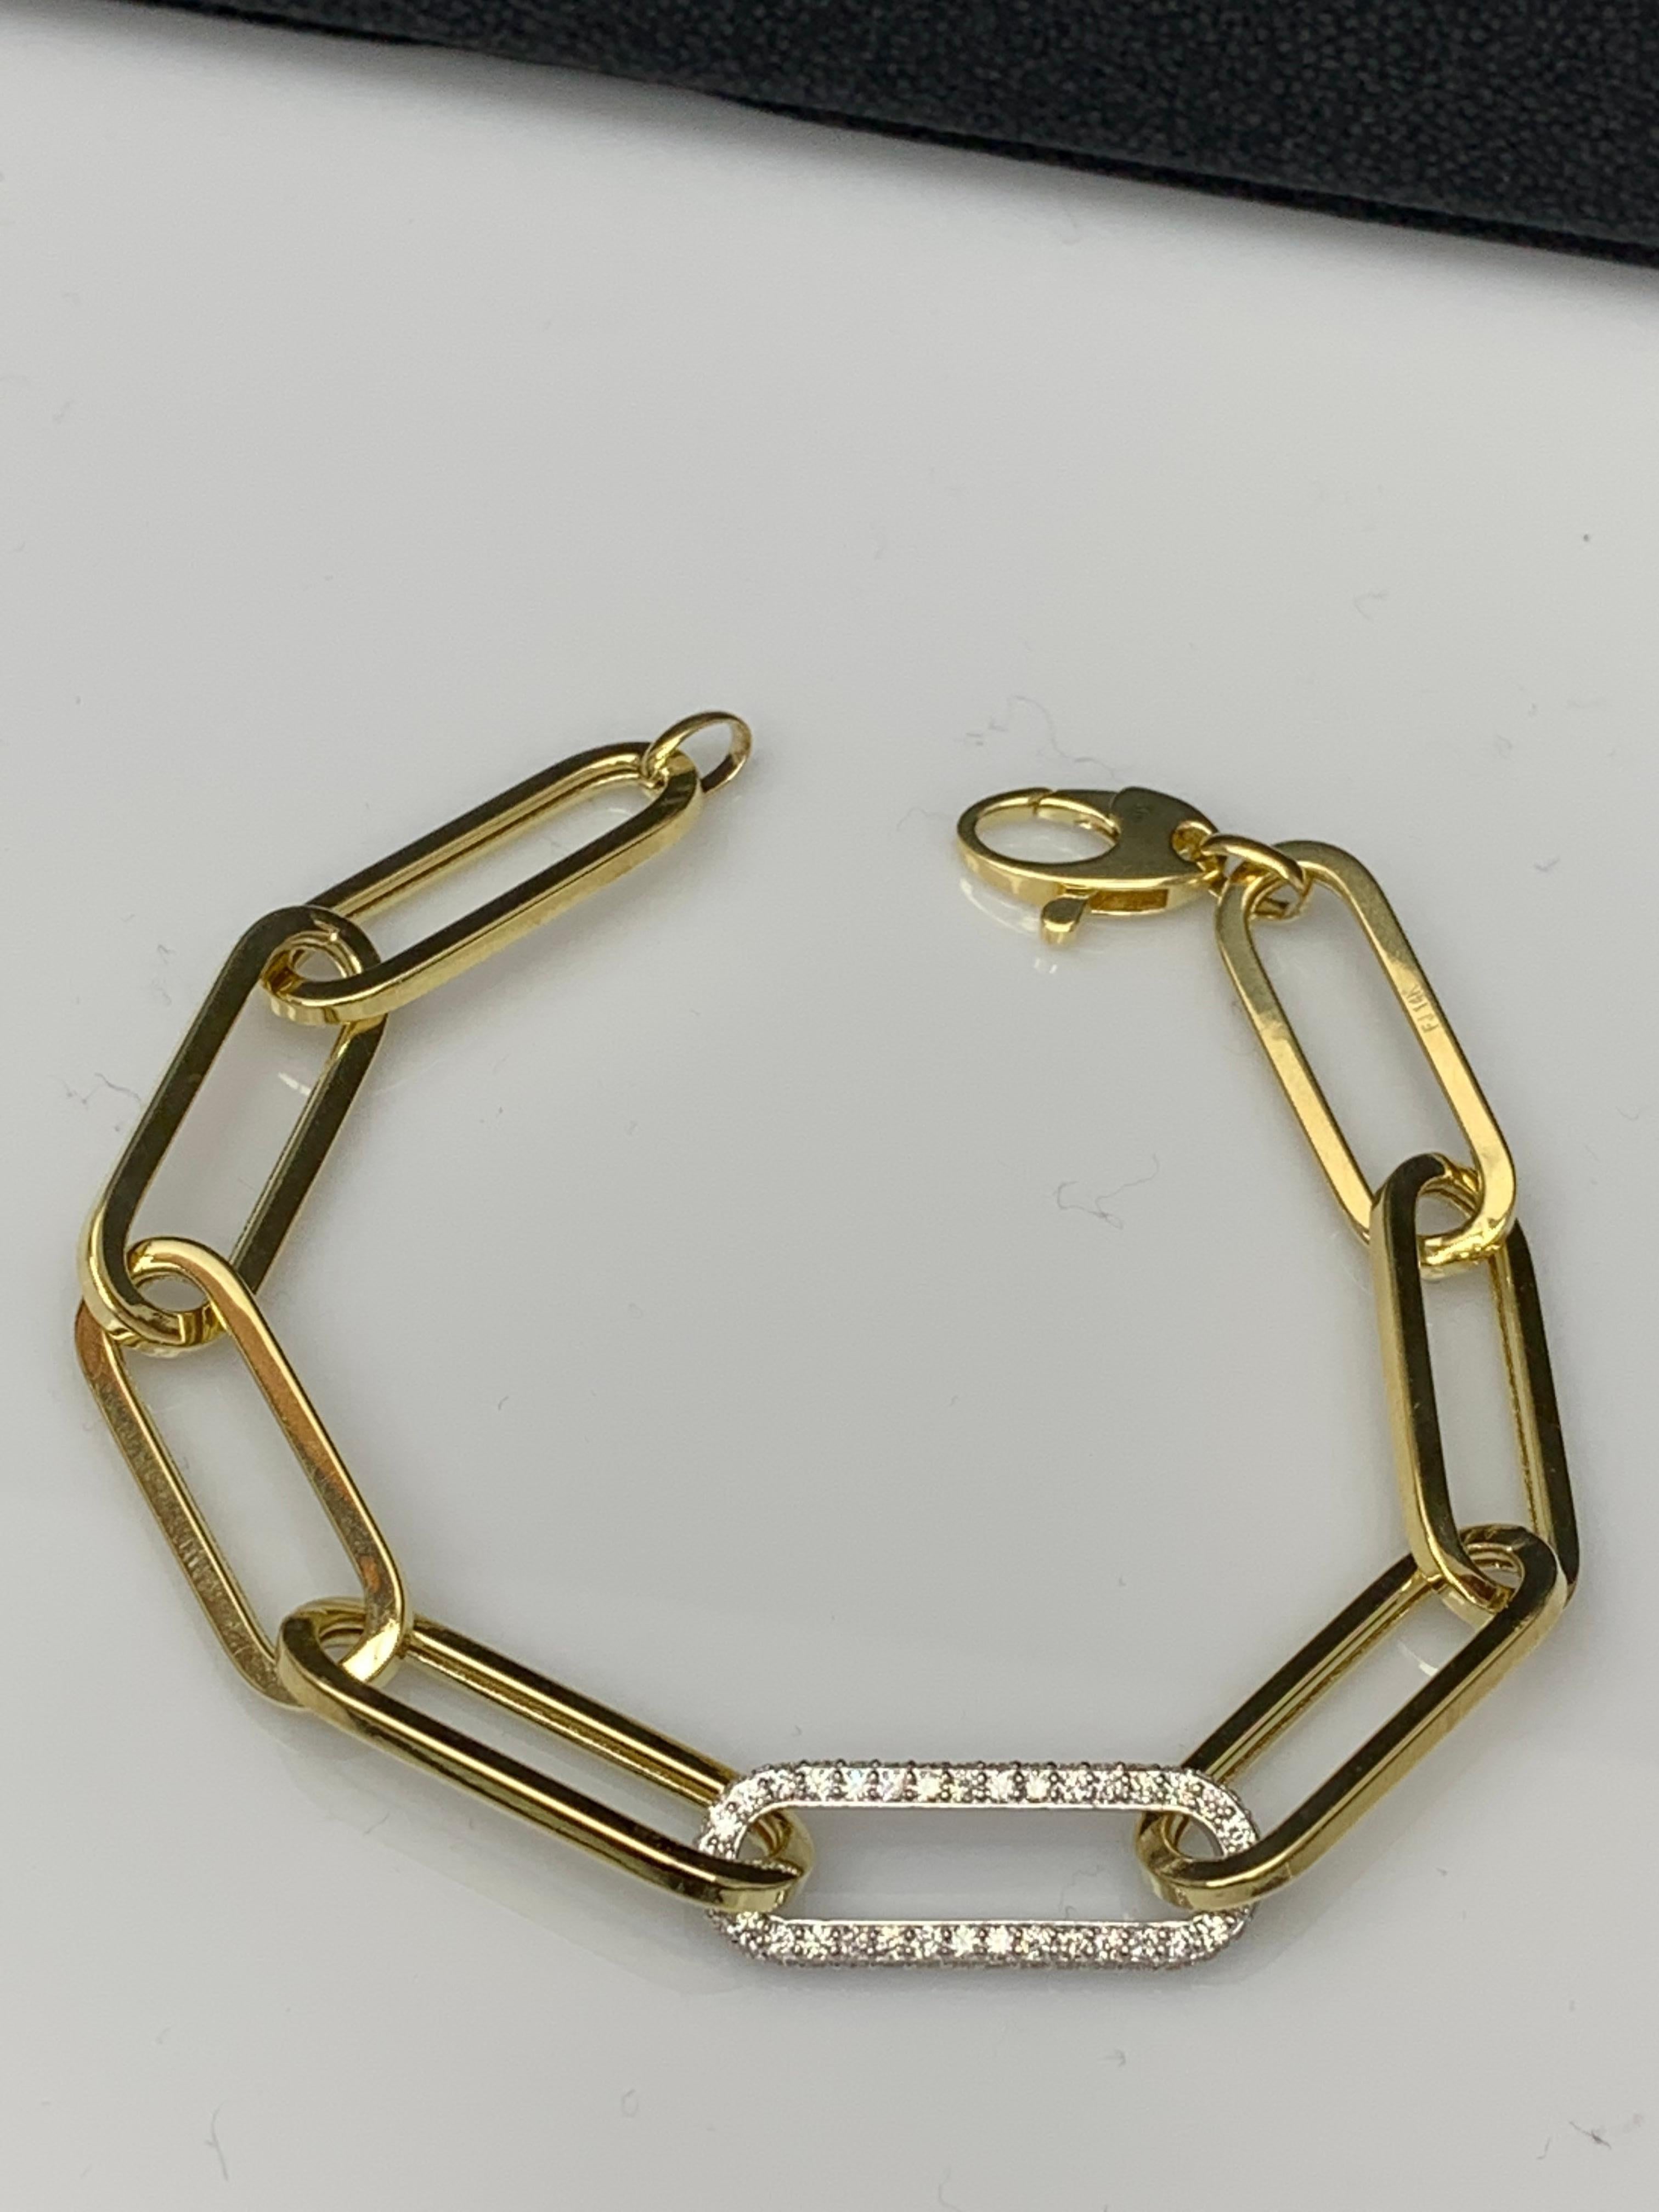 0.93 Carat Diamond Paper Clip Bracelet in 14K Yellow Gold and White Gold For Sale 5